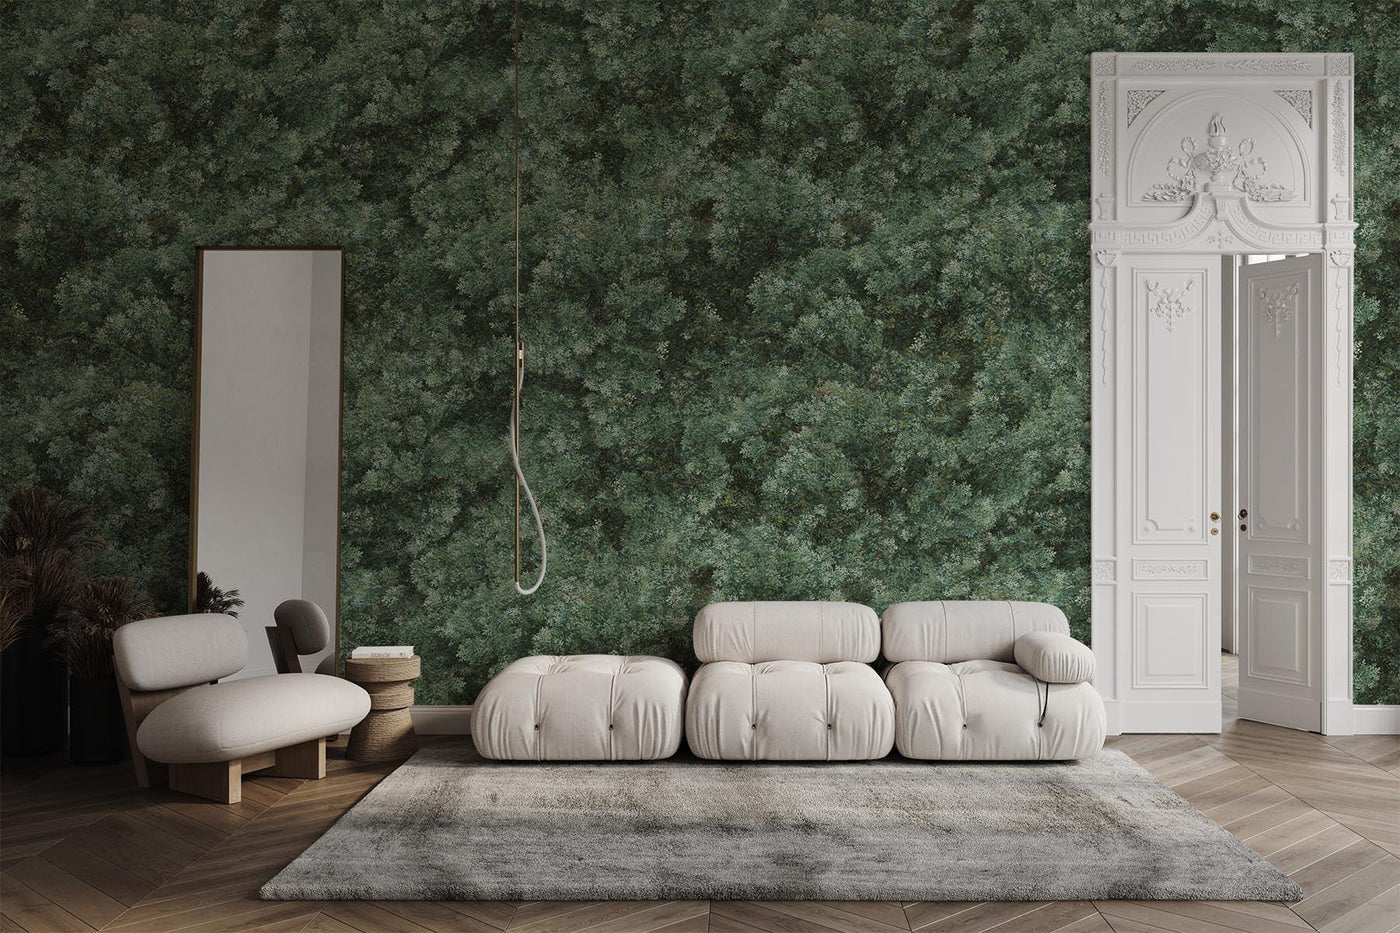 Green wall murals for living rooms, bedrooms or dining room interior updates. Floral, organic , botanical or artistic wall murals in green colorways